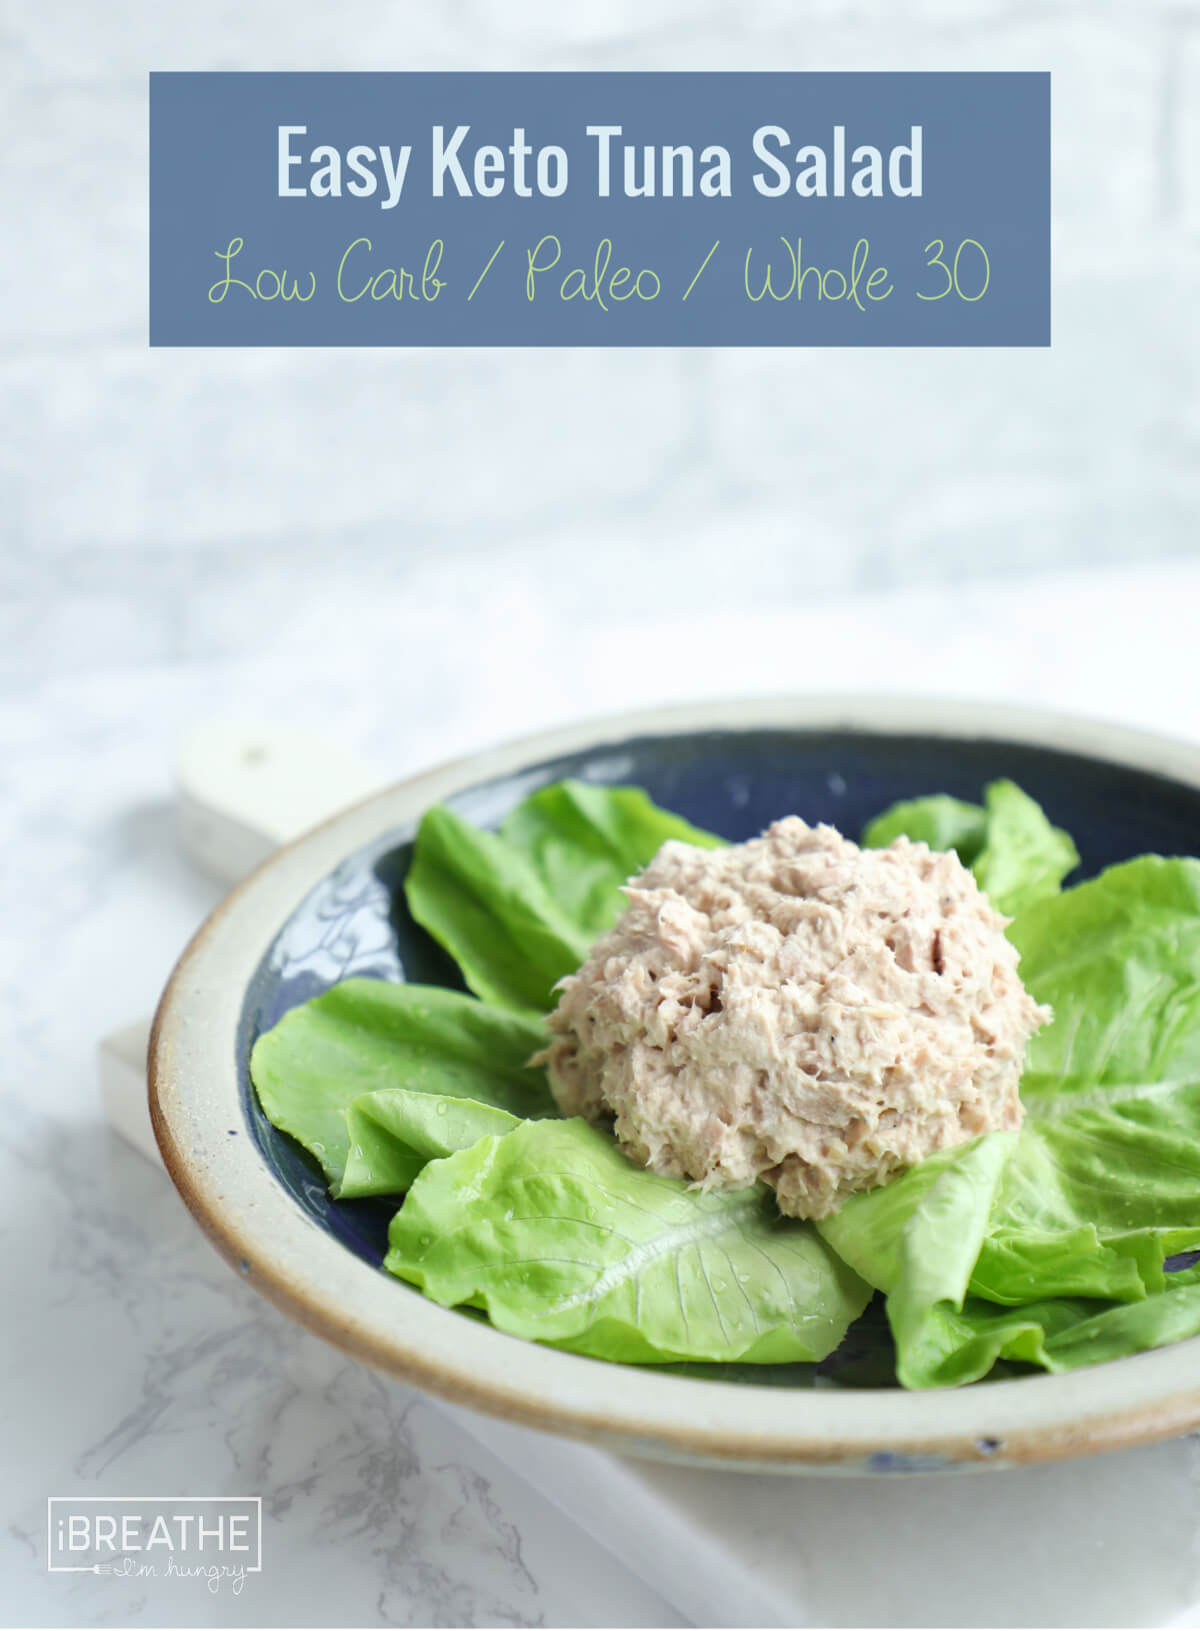 a scoop keto tuna salad shown on a bed of baby romaine lettuce leaves